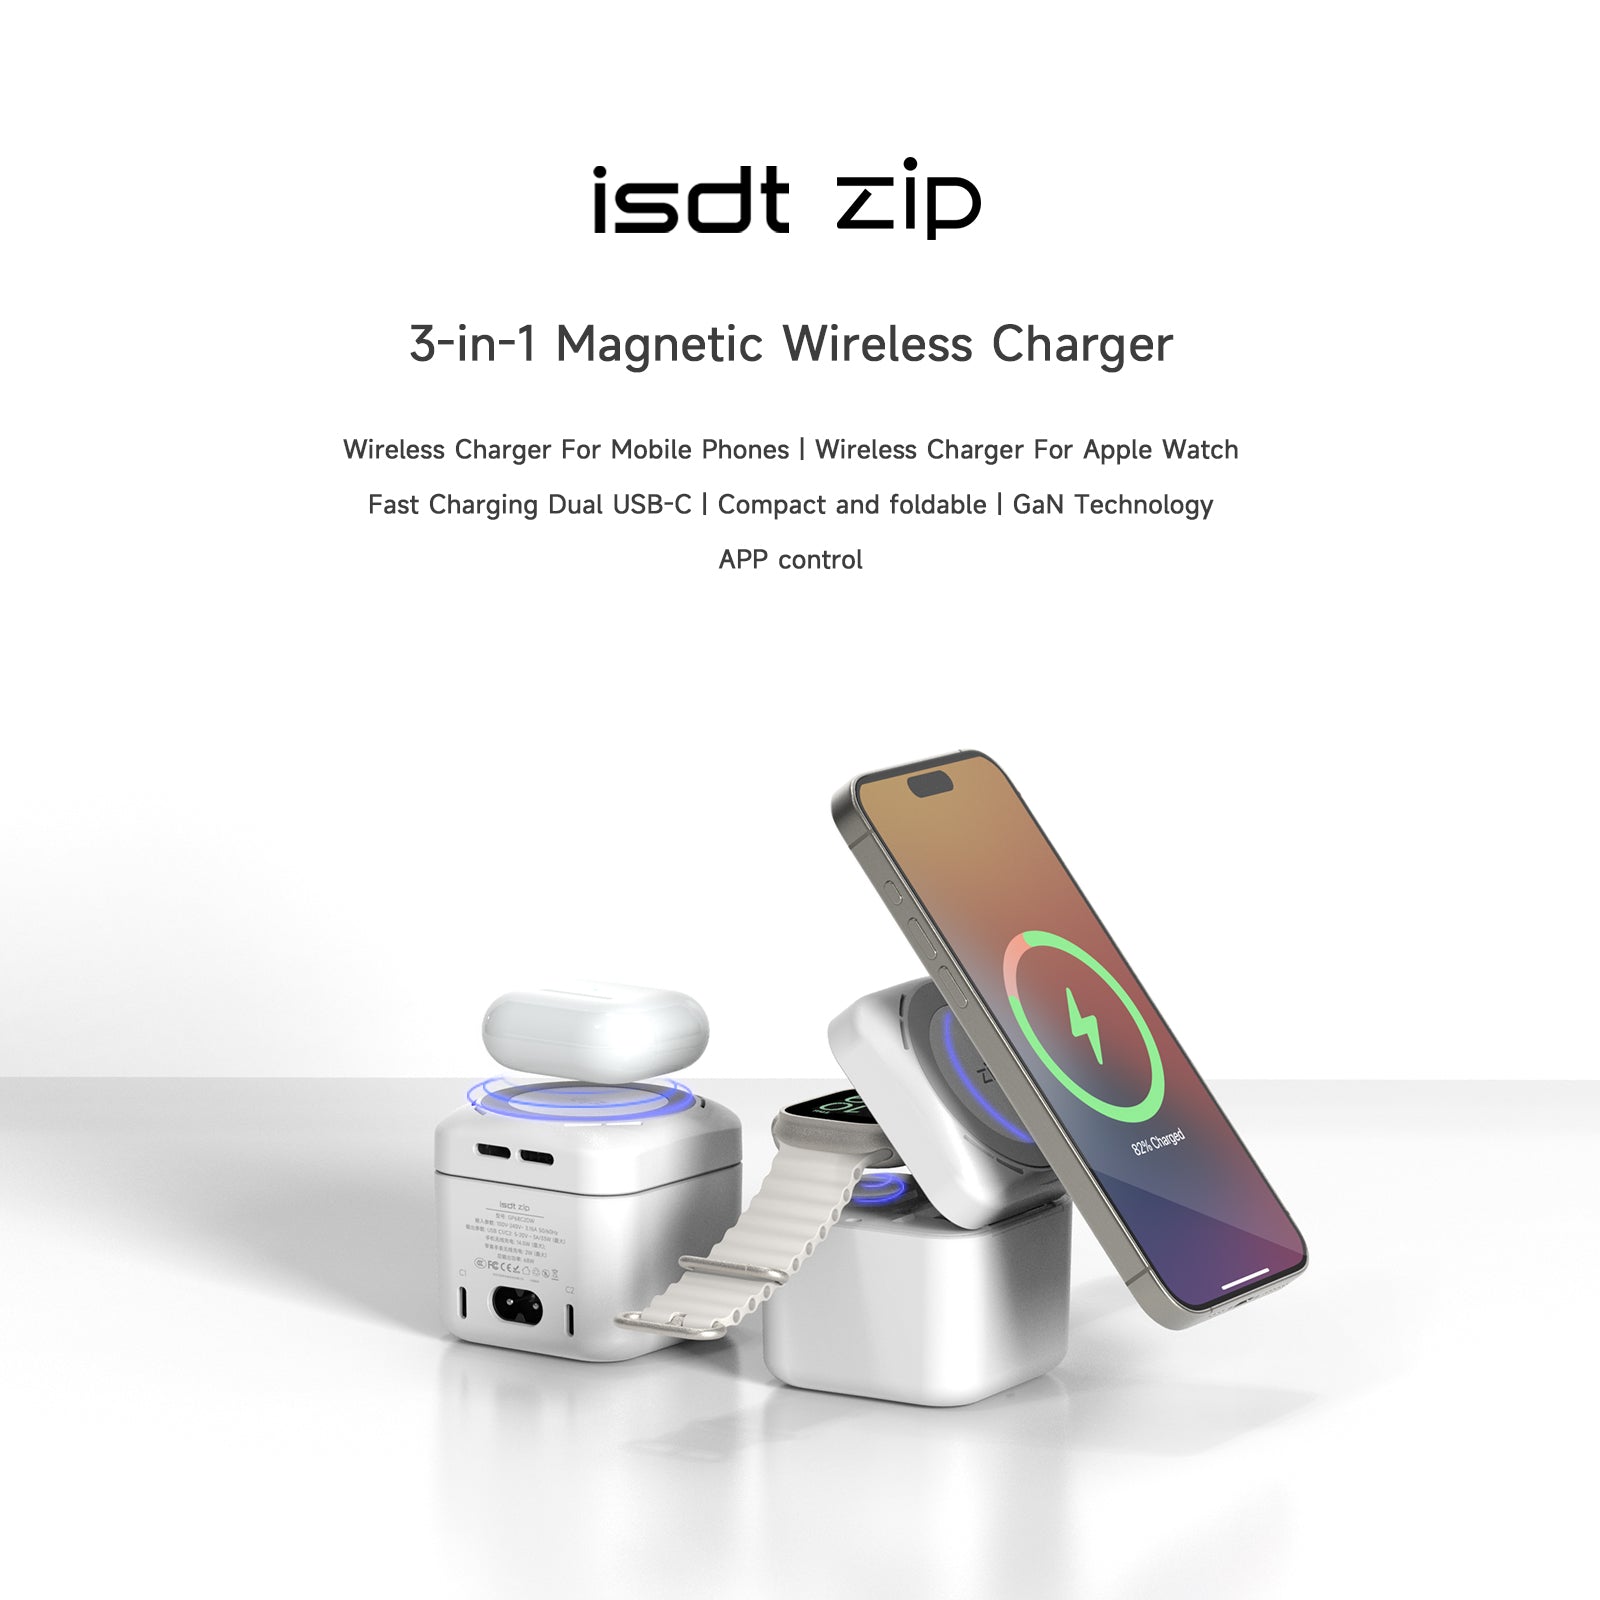 zip Magsafe Charger Stand,3 in 1 Wireless Magsafe Charger with 2x33W USB C  Charge Ports for iPhone/Apple Watch/iPad/iPod,Portable Magsafe Charger for